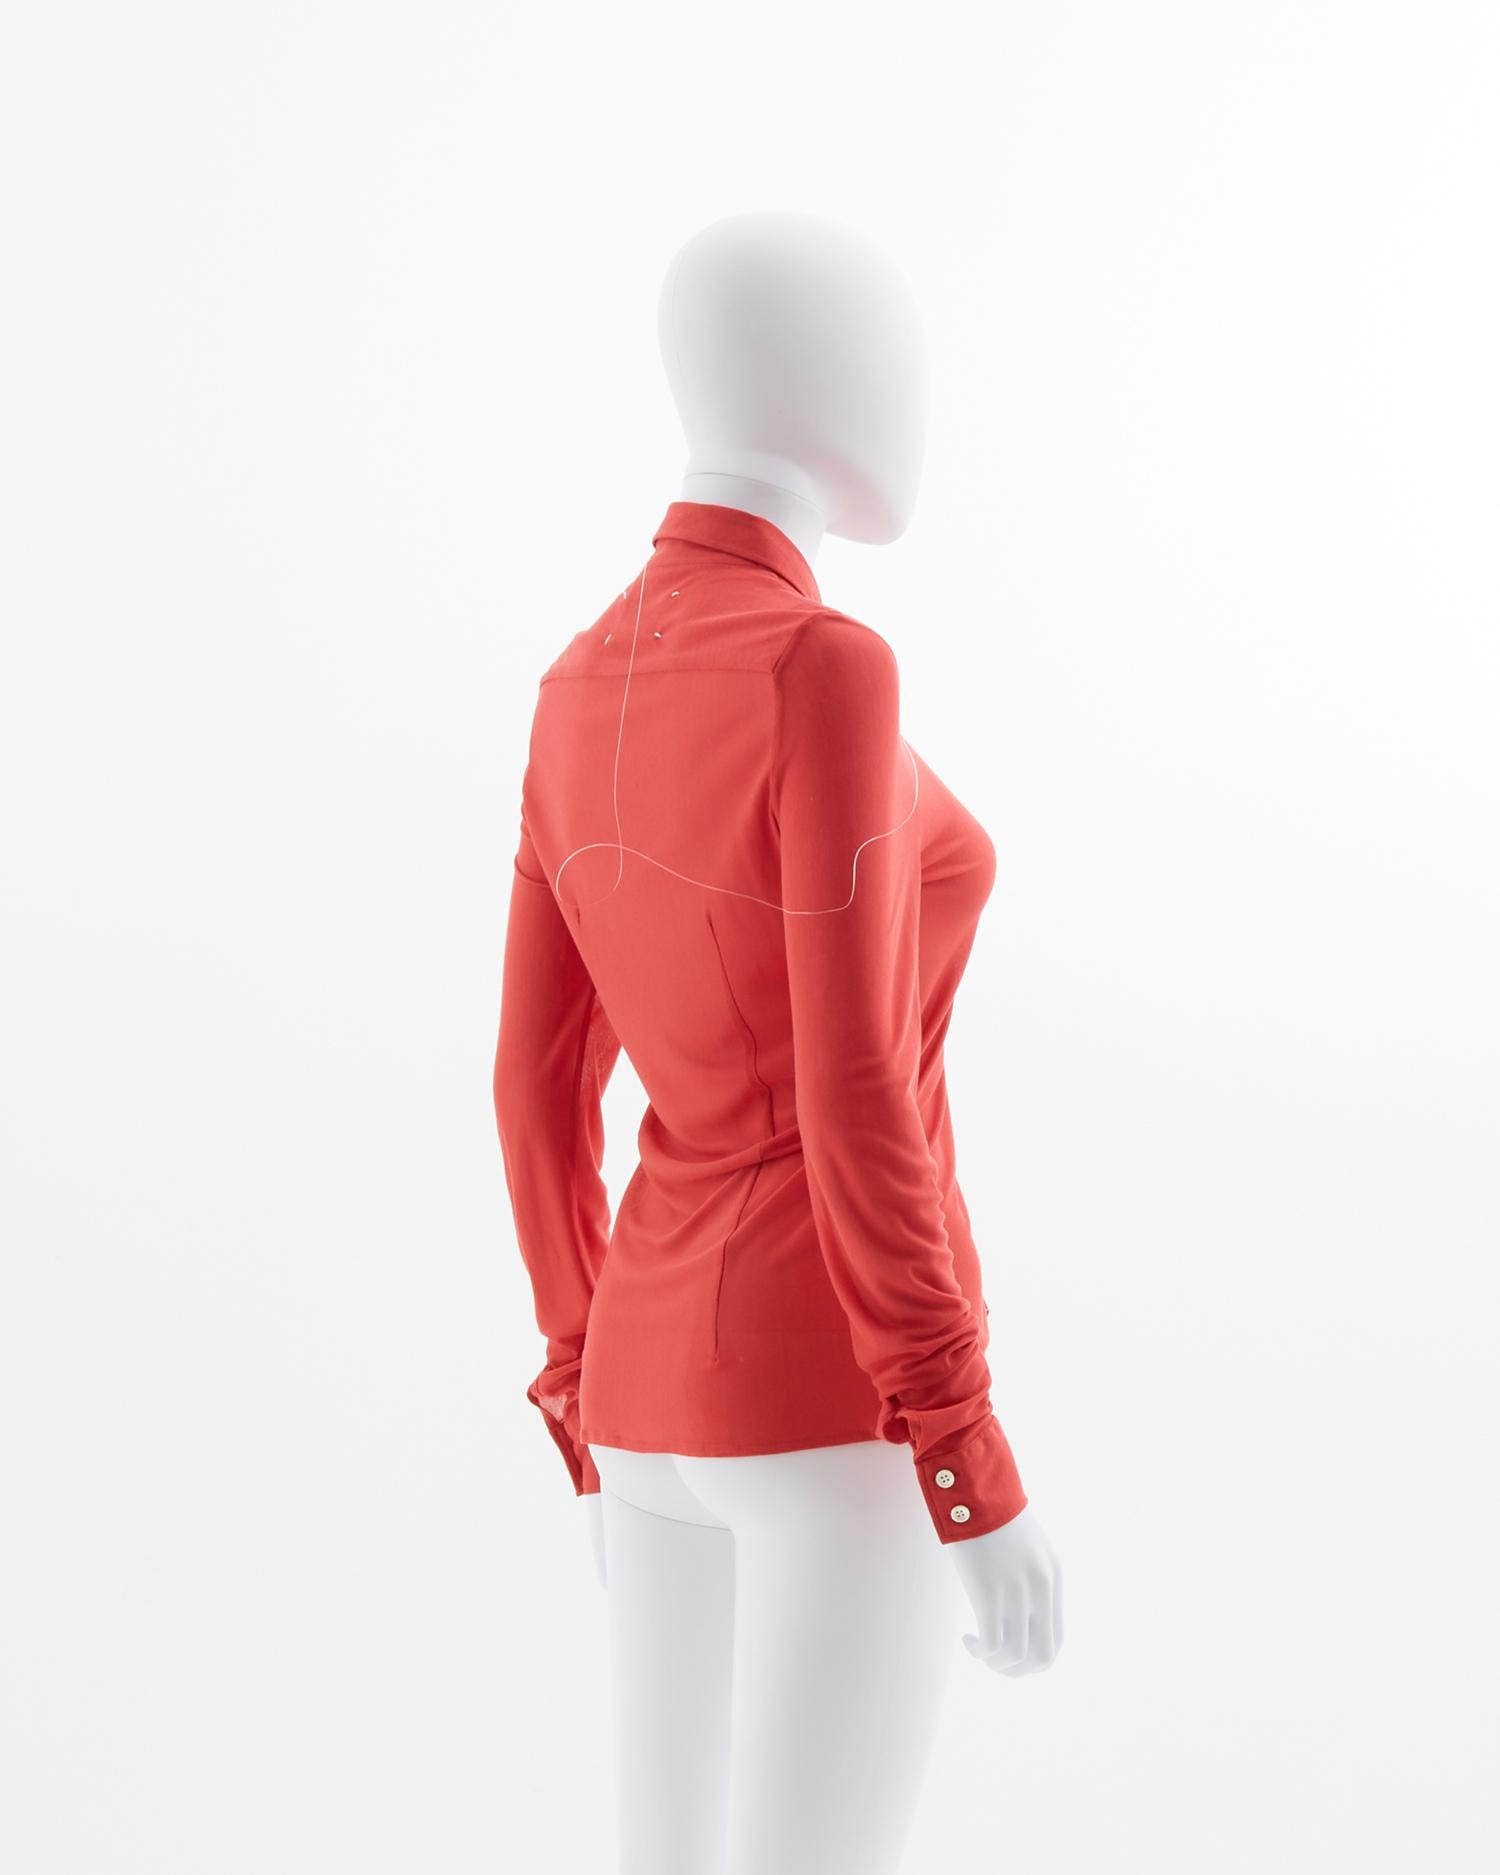 Maison Martin Margiela red viscosa shirt, ss 2001 In Excellent Condition For Sale In Milano, IT